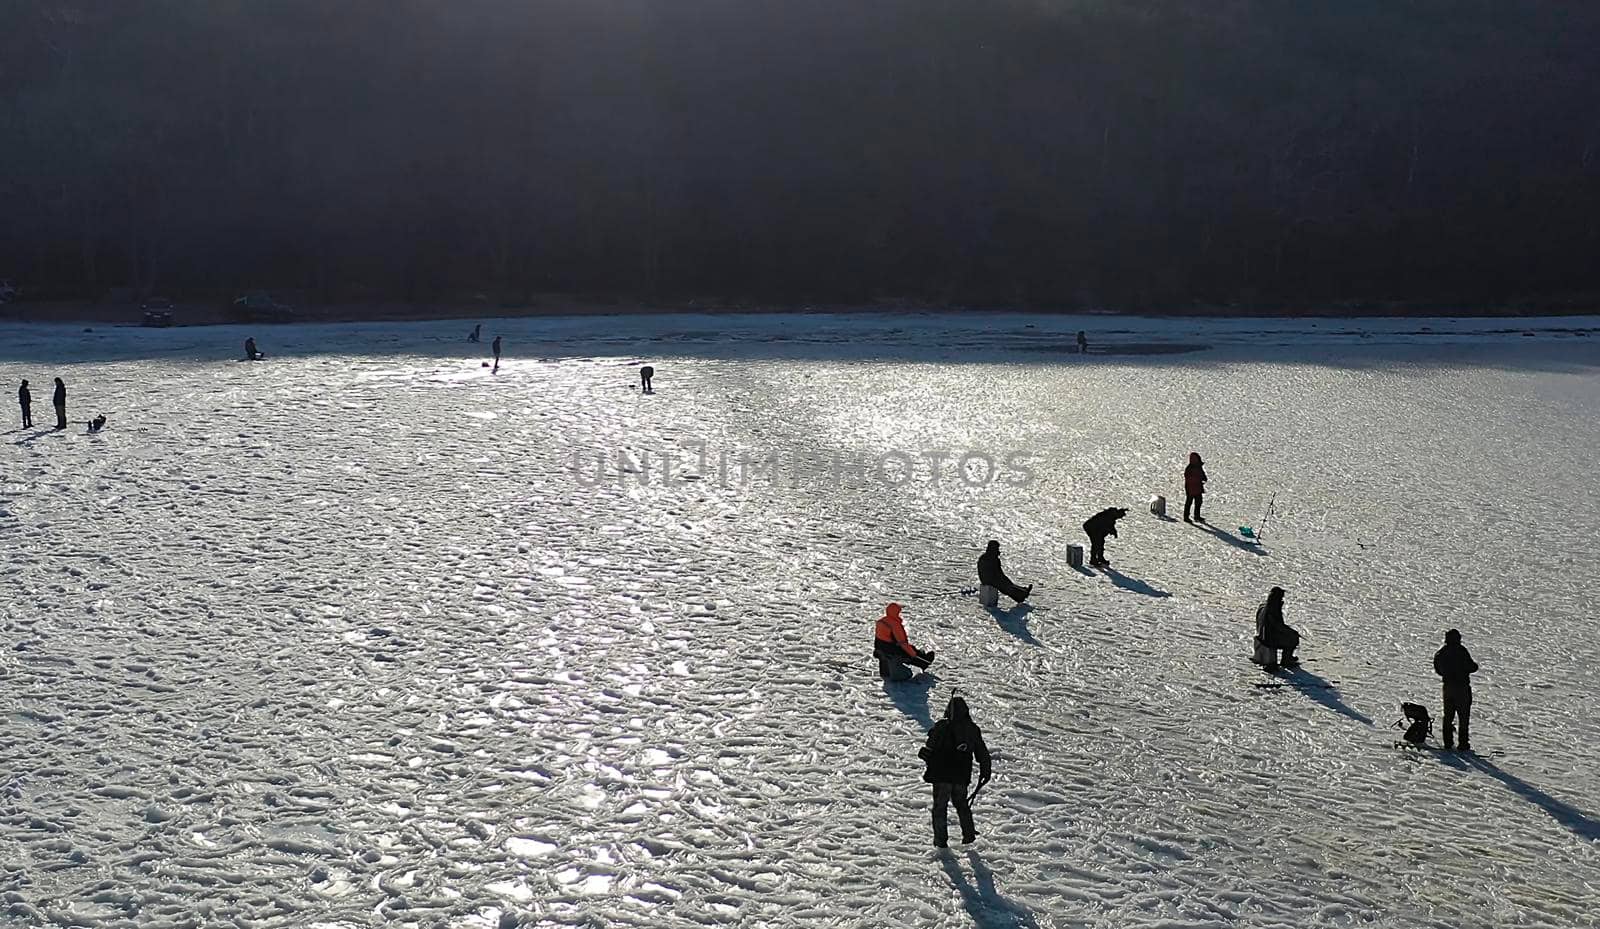 Vladivostok, Russia-December 12, 2018: Aerial view of a frozen Bay with fishermen. People are standing on the surface of white ice.